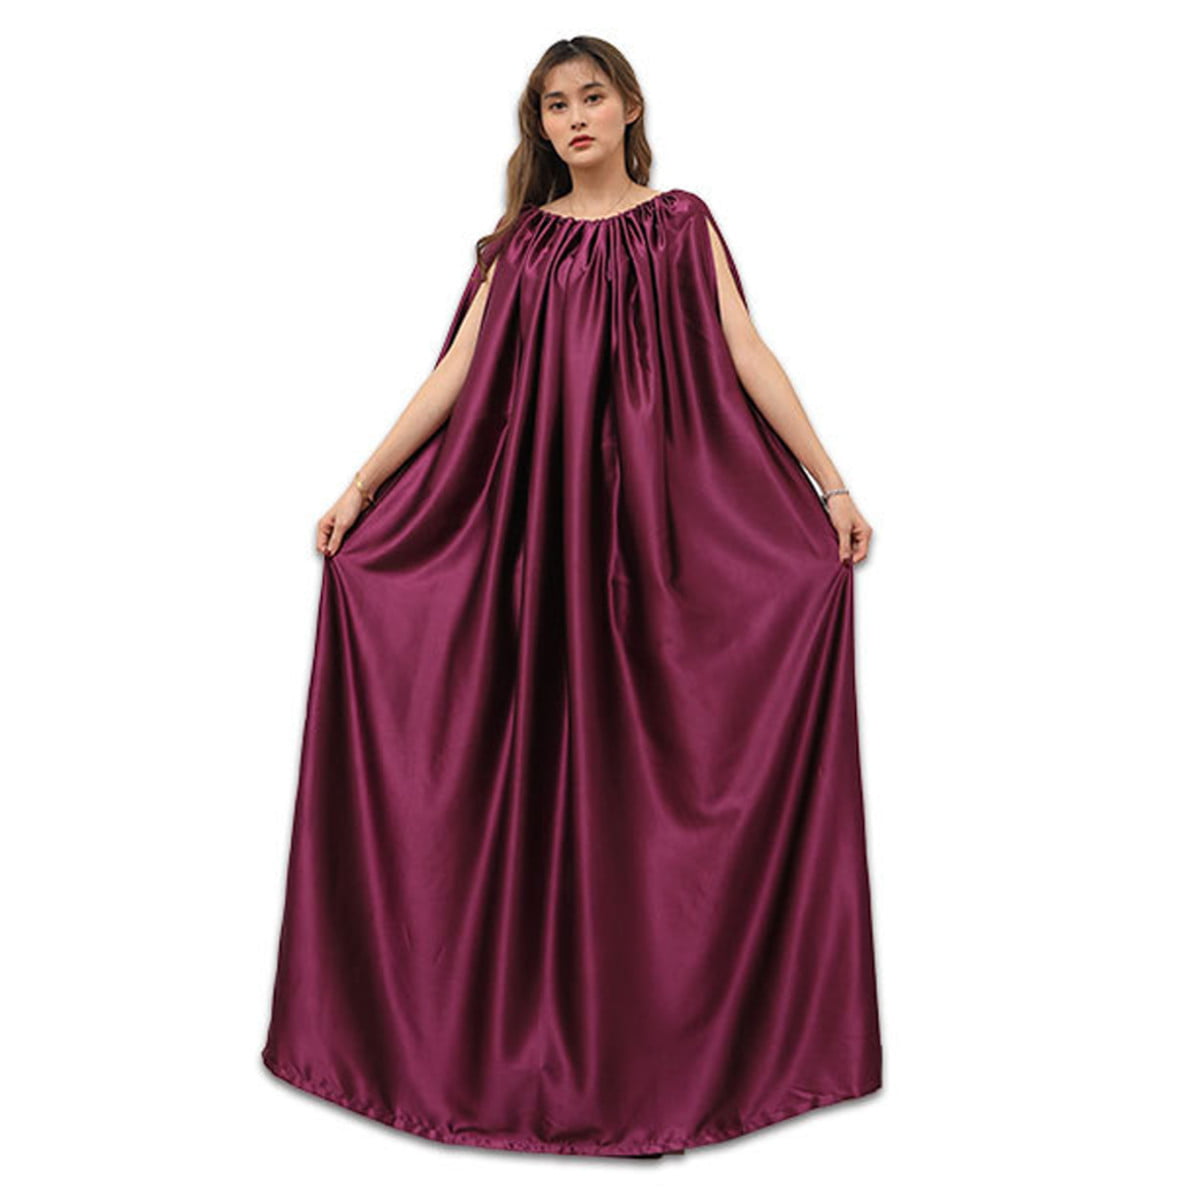 Yoni Steam Gown,Bath Robe,Soft Fabric Breathable Yoni Steam Gown Spa Fumigation Bath Robe Sauna Sweating Tool,Cloak Tube Top,Full Body Covering,One Size Fit Most Women 